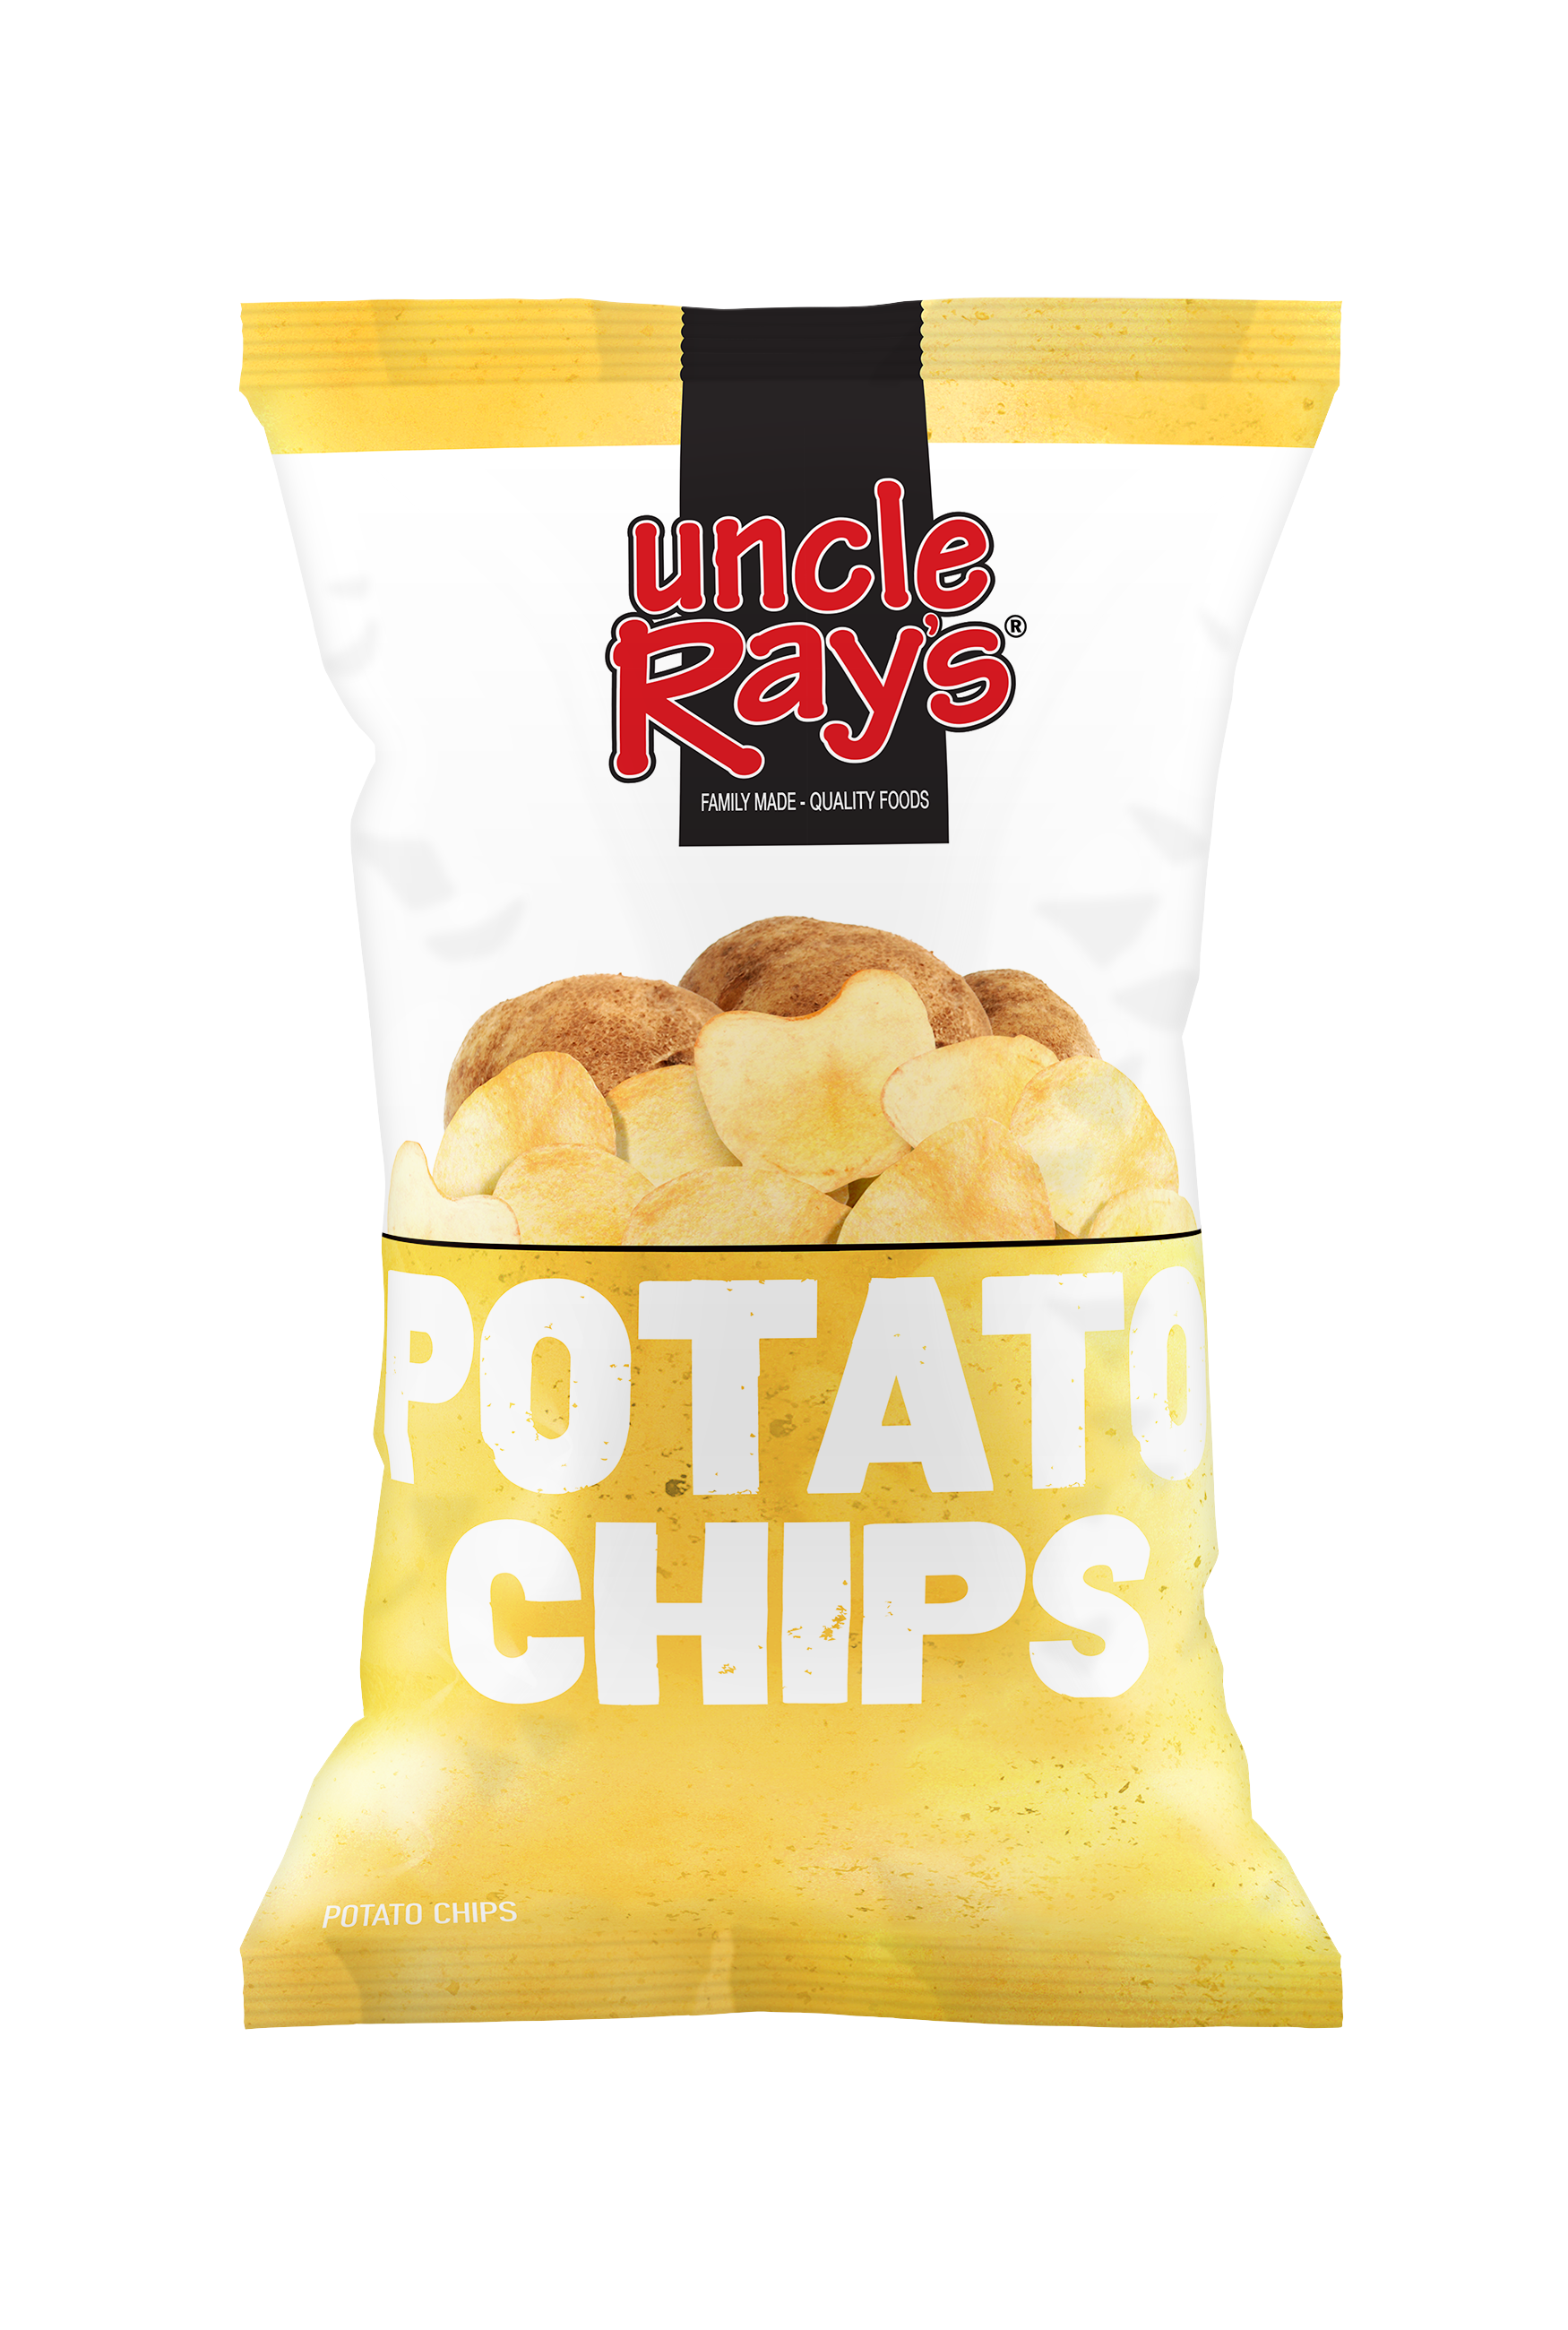 Uncle rays regular chips 3oz